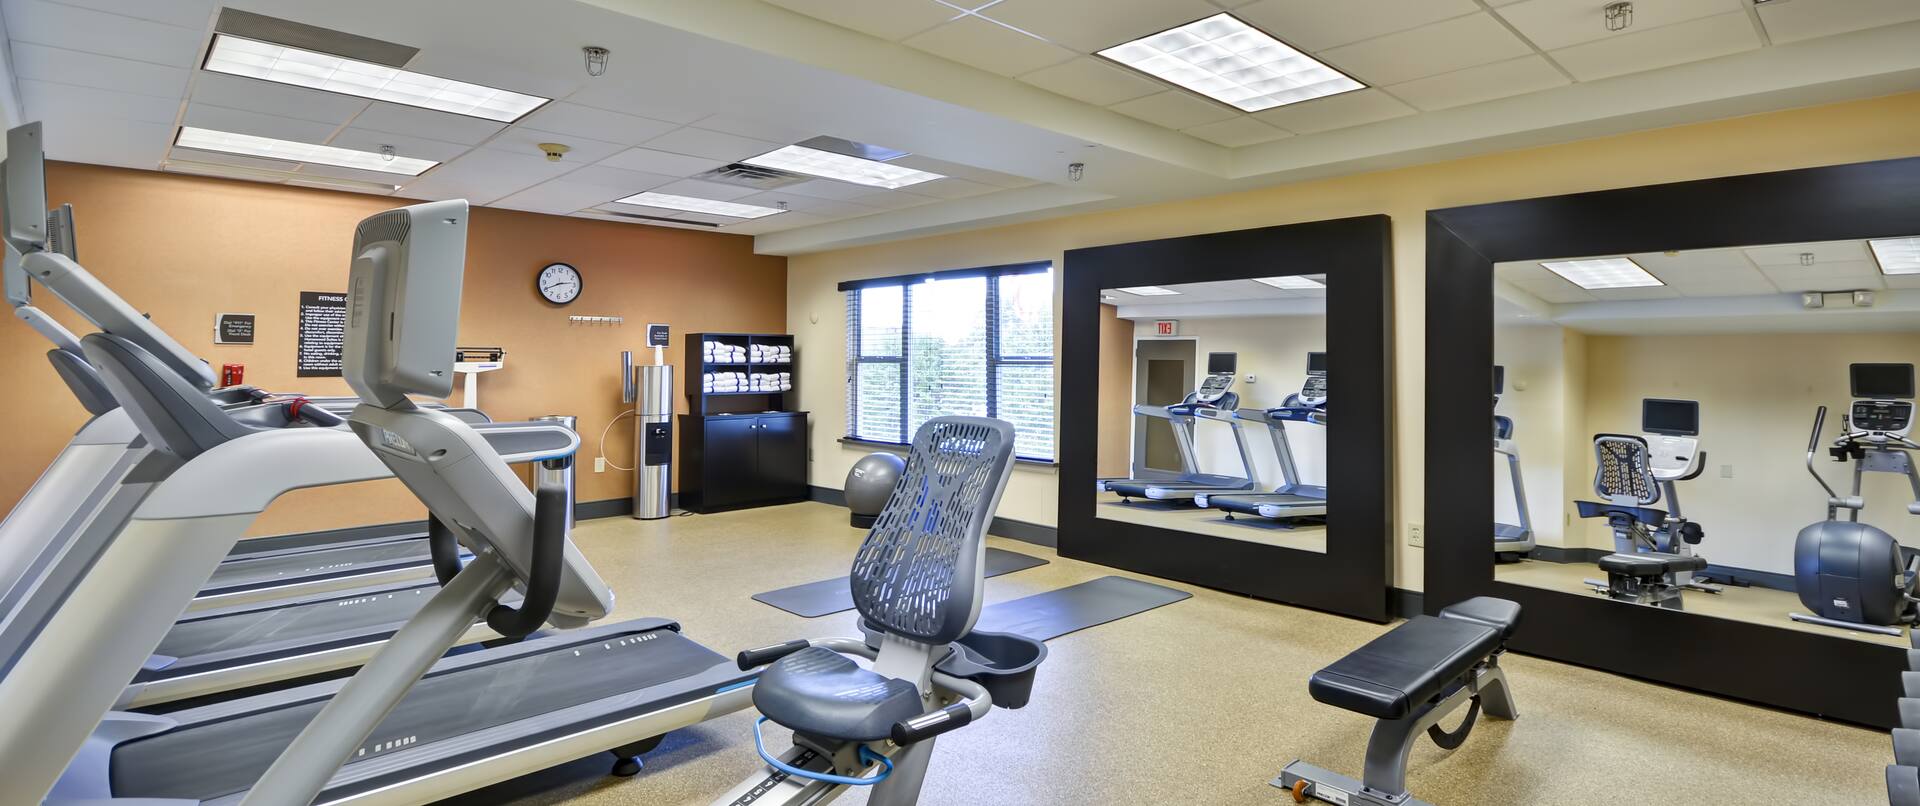 Fitness Center with Treadmills, Cycle Machine and Weight Bench